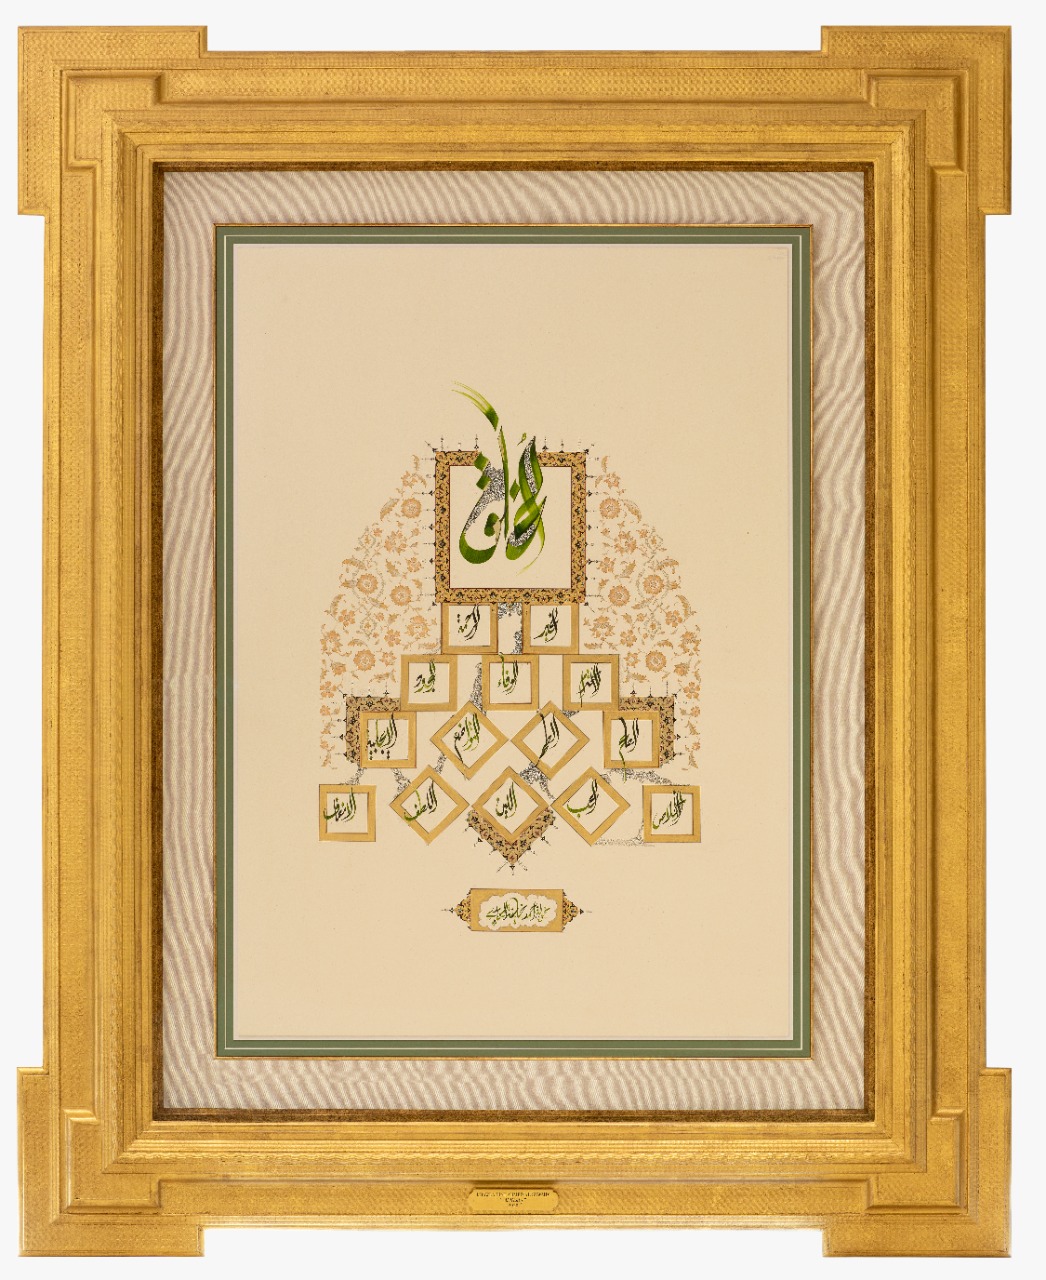 <p>
	<span style="font-size: 14pt;">Al Khulq (Virtues)</span></p>
<p>
	 </p>
<p>
	Benevolence, mercy, respect, loyalty, generosity, reconciliation, purity, humility, optimism, sincerity, love, flexibility, kindness, fairness.</p>
<p>
	 </p>
<p>
	If the pillars of virtues are fortified,the most beautiful features of a human being can be derived from them.</p>
<p>
	Virtues are a fertile ground</p>
<p>
	from which the goodness of life can sprout.</p>
<p>
	 </p>
<p>
	Virtues lifts the soul can elevate elevating us from the dust of time</p>
<p>
	 </p>
<p>
	151 x 122 cm - 59.4 x 48 inches</p>
<p>
	2020</p>
<p>
	Eloquent Poetry</p>
<p>
	 </p>
 